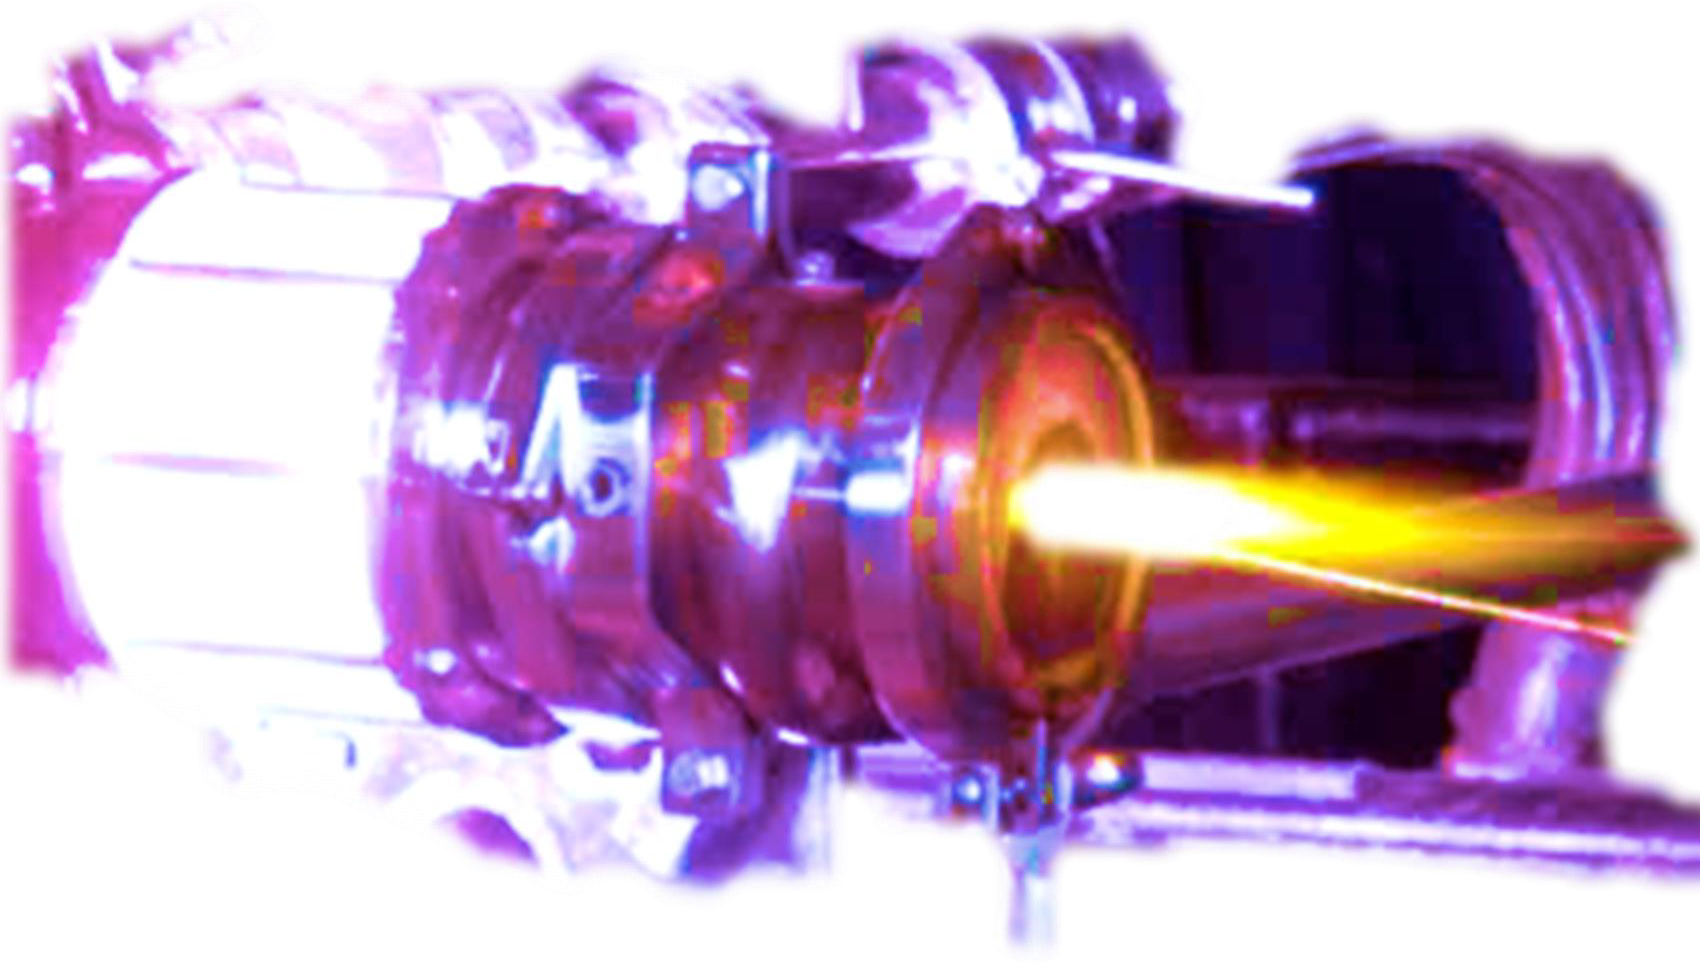 A purple and yellow image of an engine.